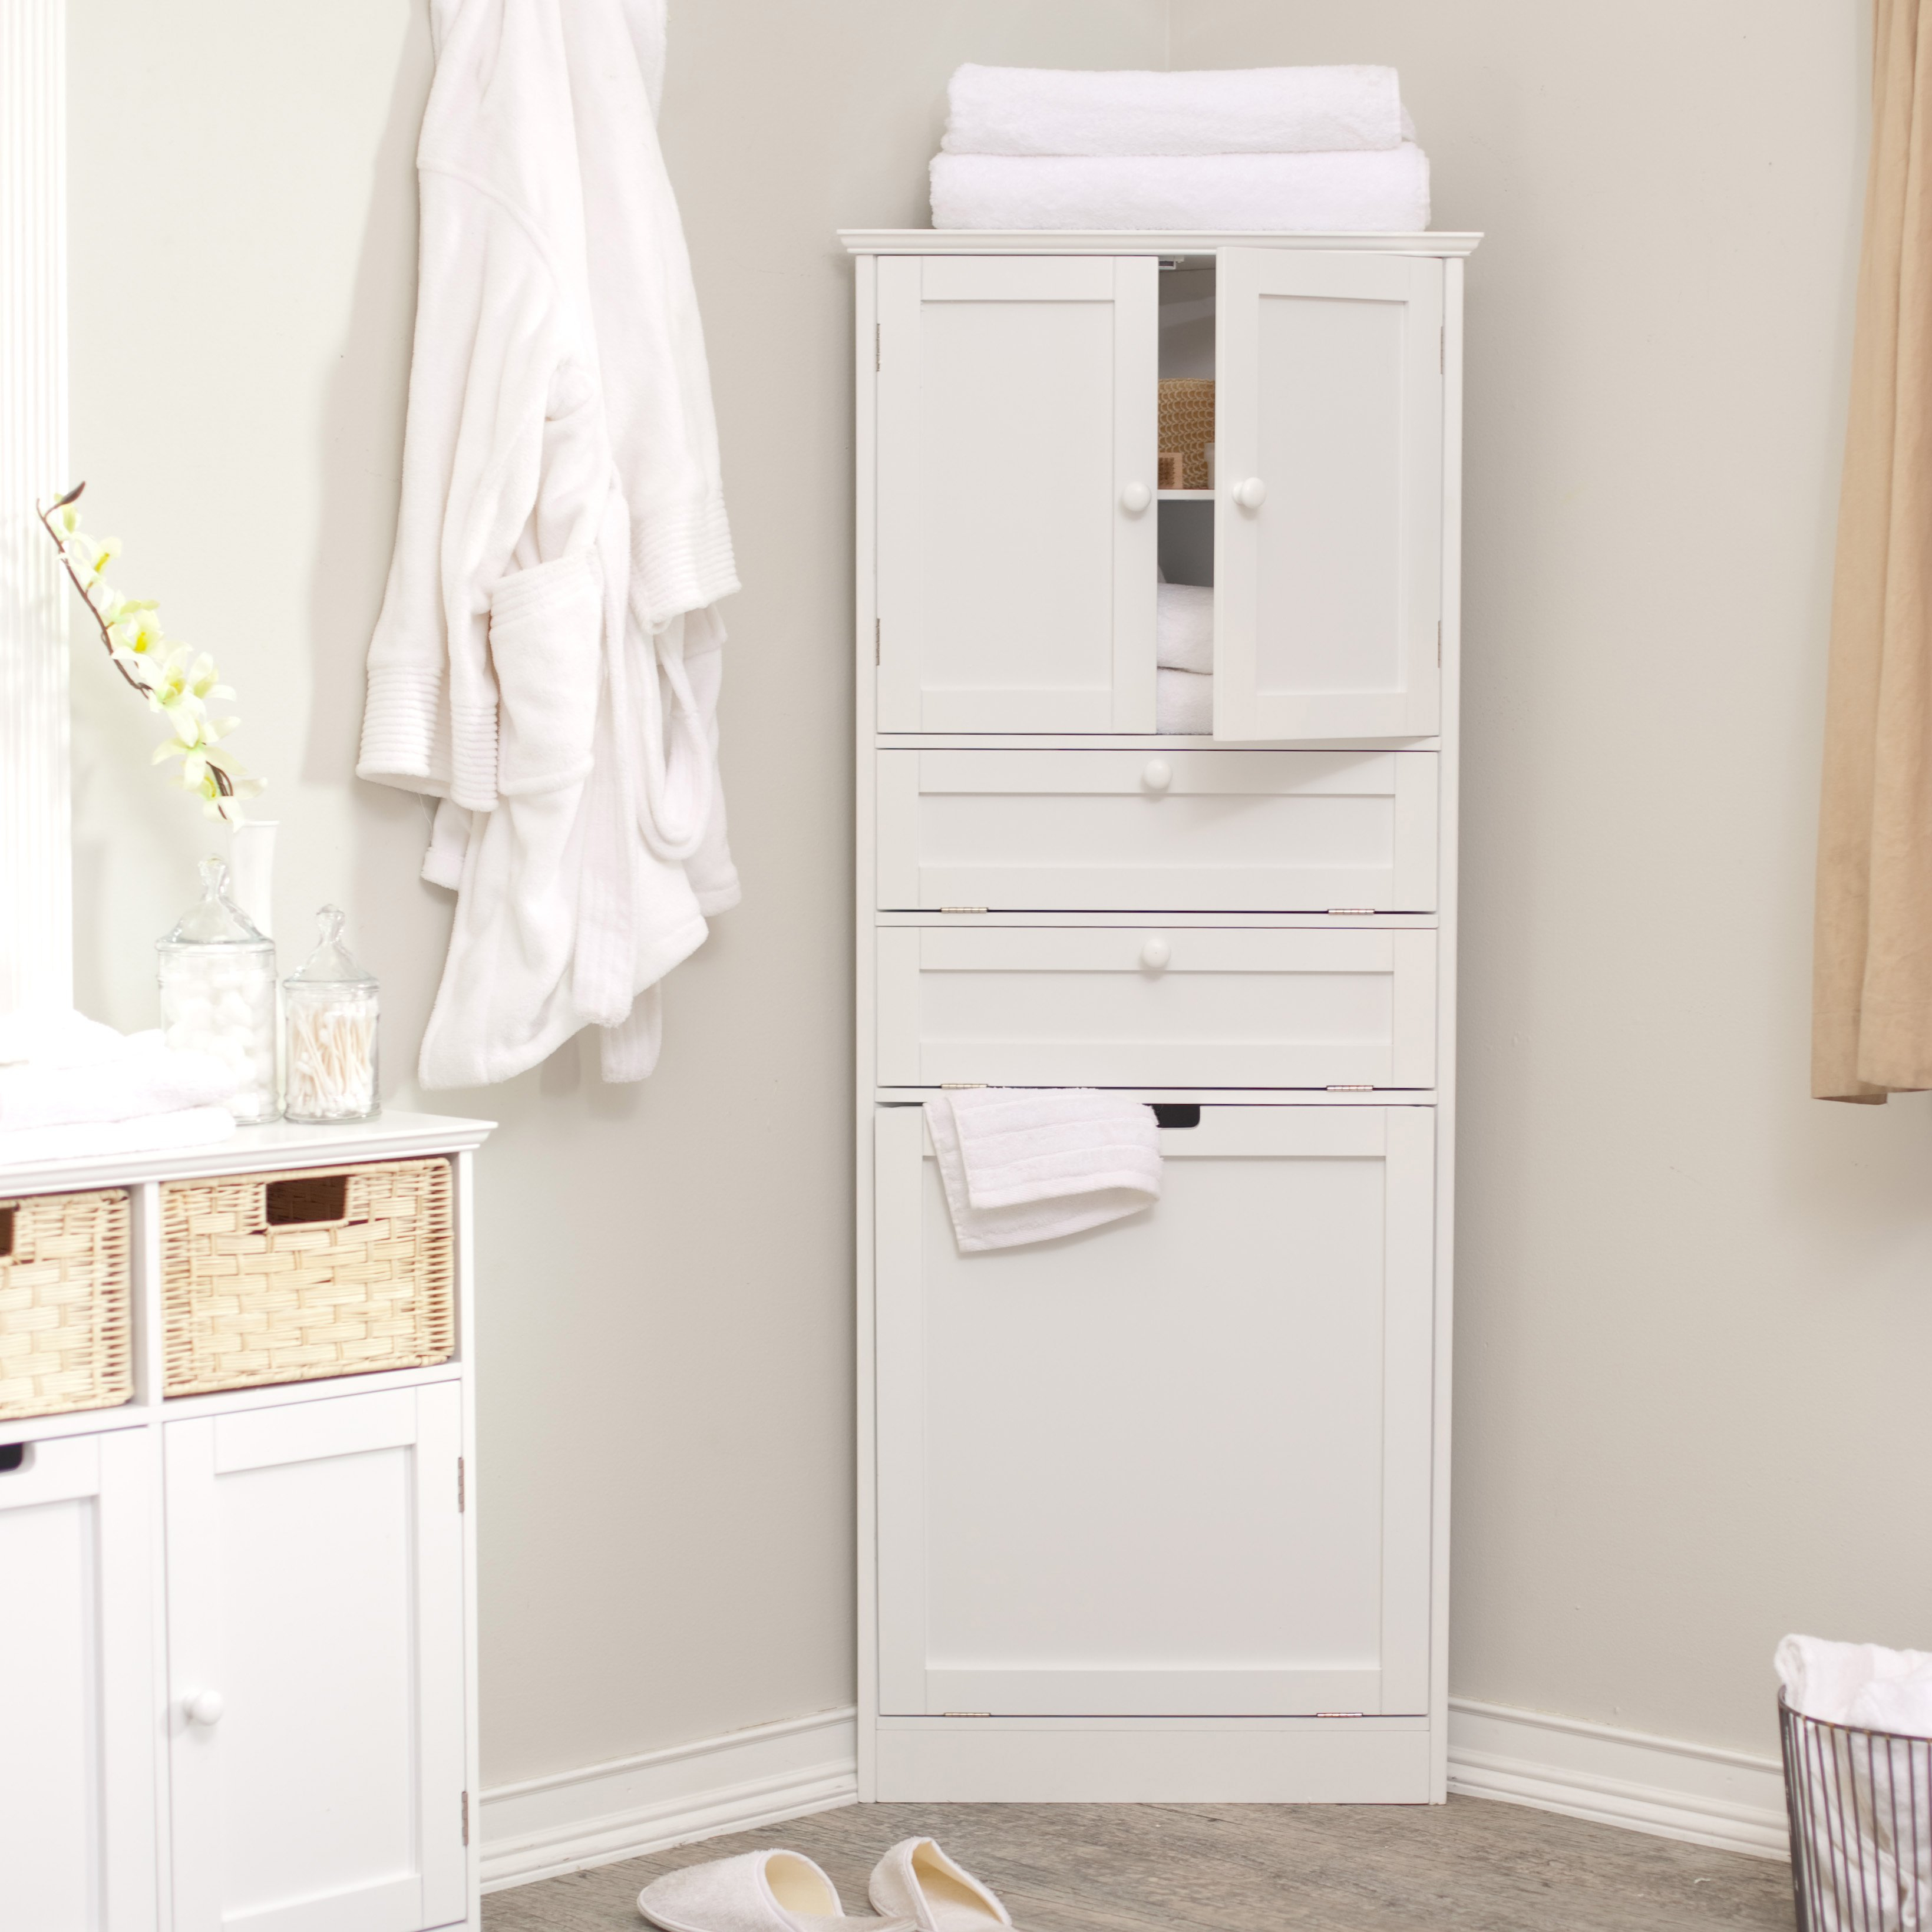 Bathroom Corner Cabinets The New Way Home Decor Enhance The with proportions 3279 X 3279